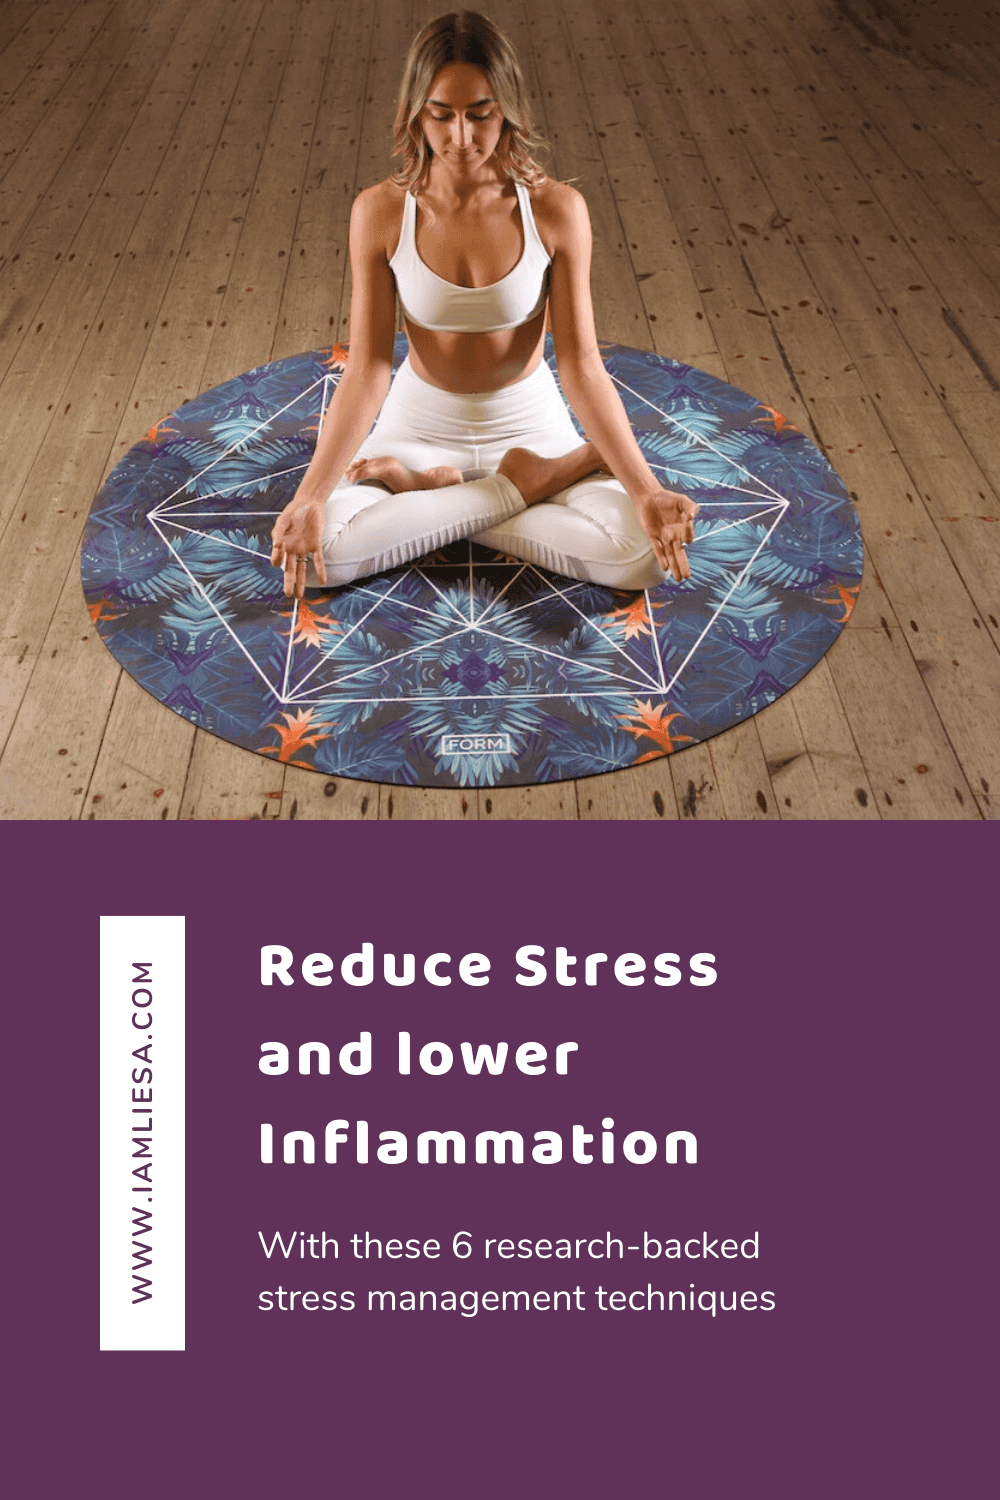 We're all aware that stress isn't good for our health. But did you know just how detrimental it can be? Learn 6 reseach-backed stress management techniques that not only reduce stress but also lower levels of inflammation!